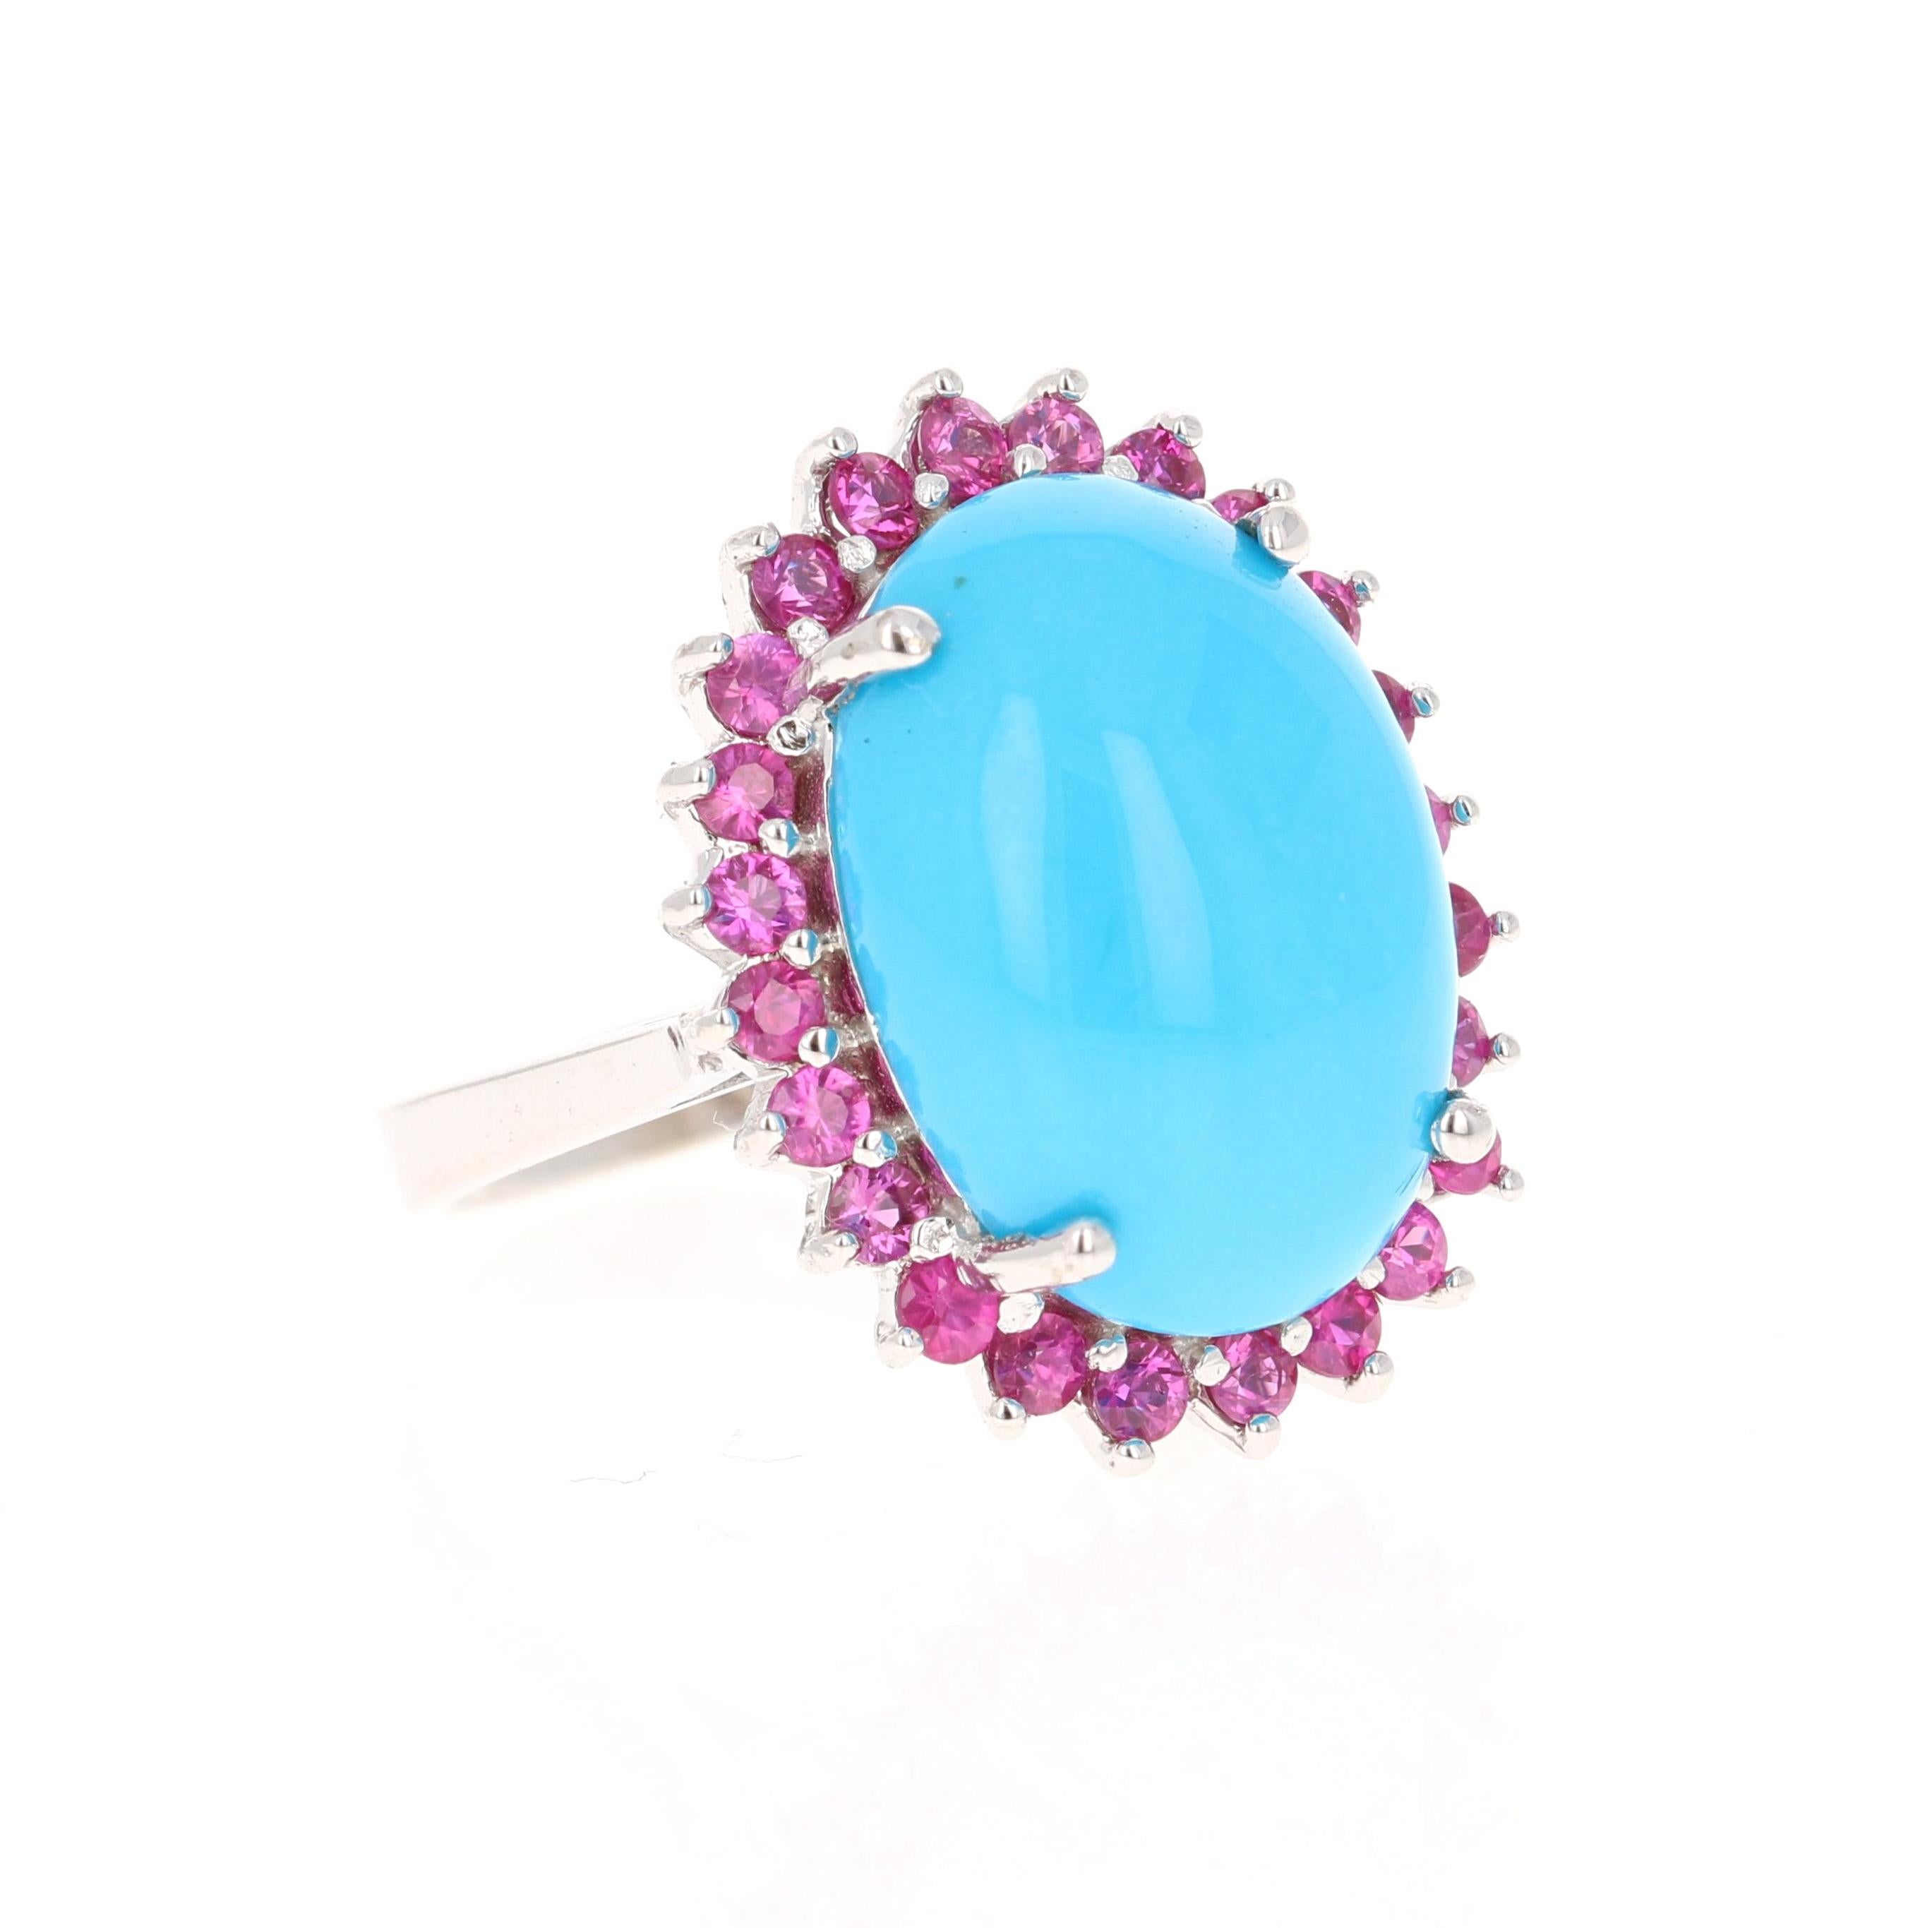 This gorgeous cocktail ring has a gorgeous Oval Cut Turquoise that weighs 9.05 carats embellished with 24 Round Cut Pink Sapphires that weigh 1.04 carats. The total carat weight of the ring is 10.09 carats. 

It is made in 14K White Gold and weighs